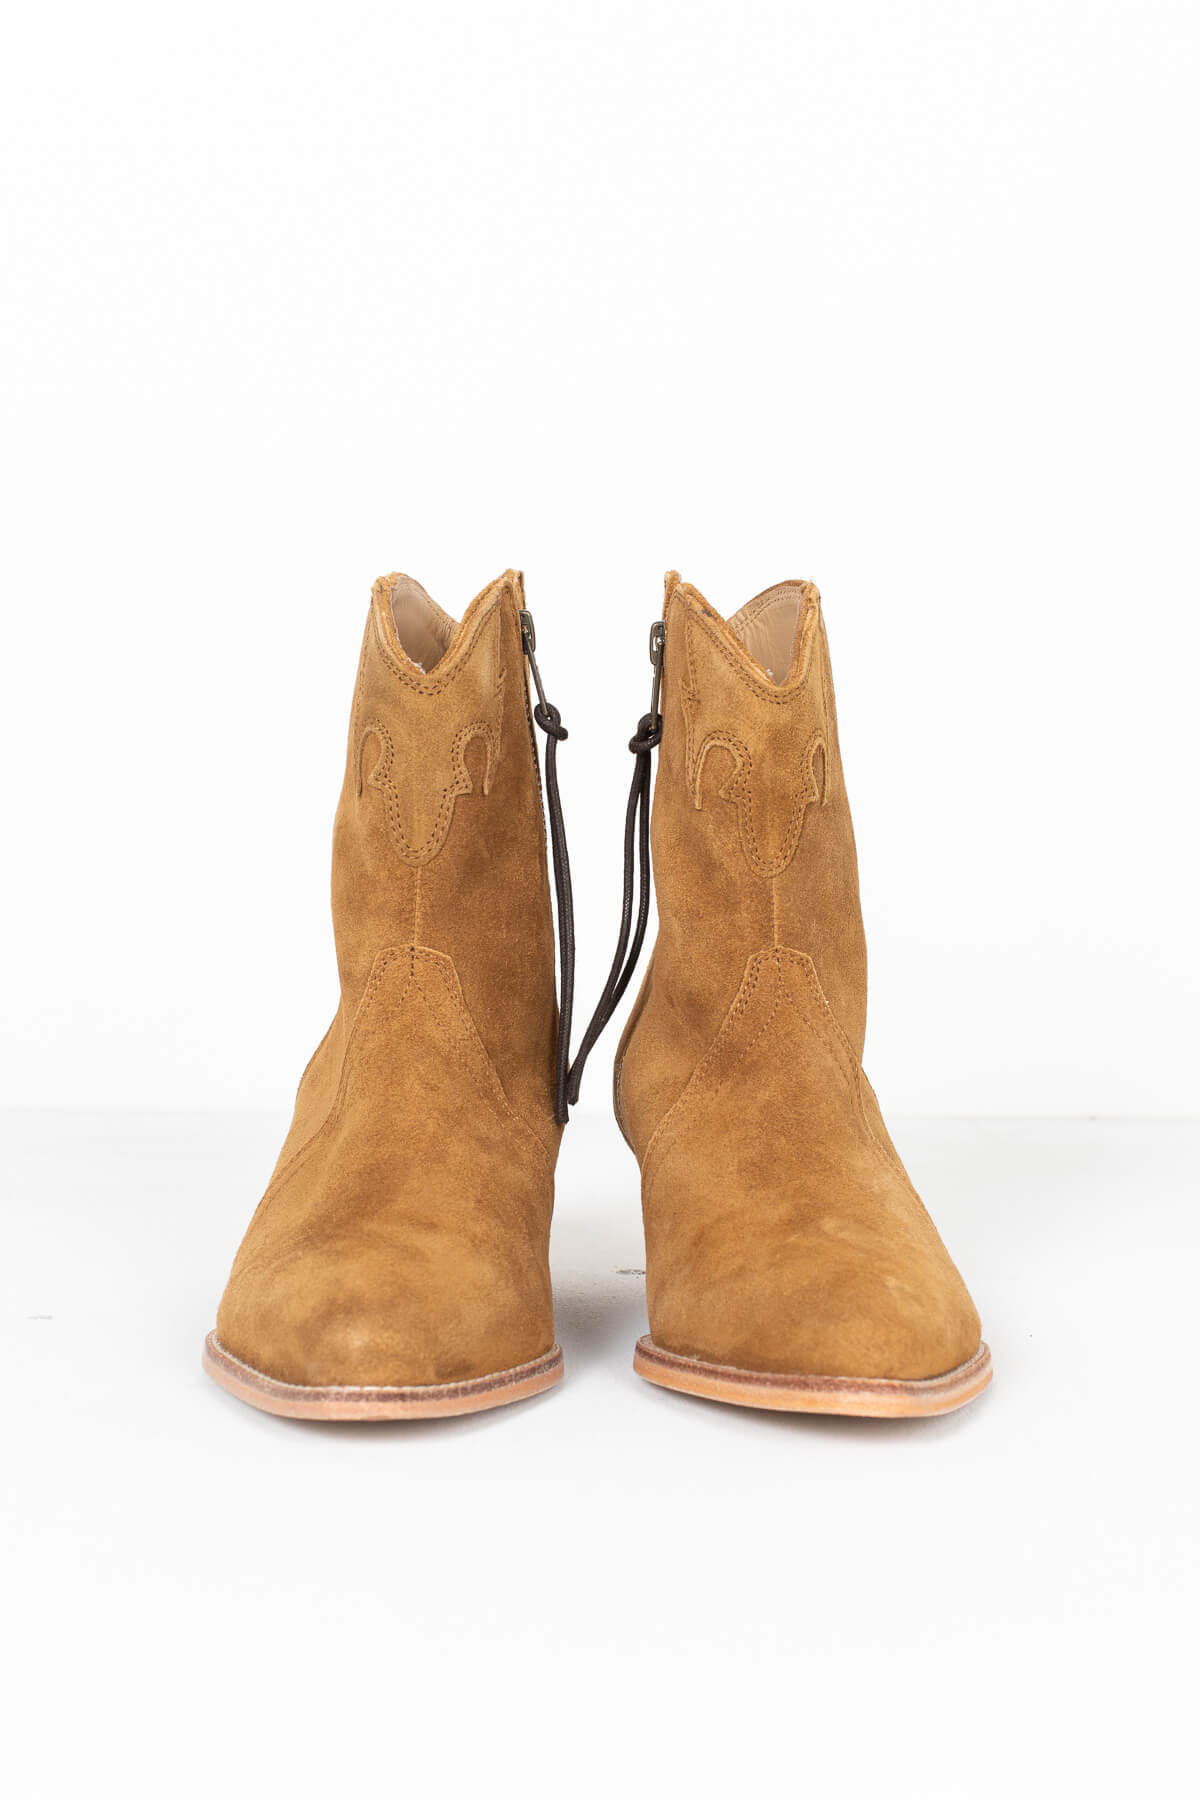 New Frontier Boots by Free People